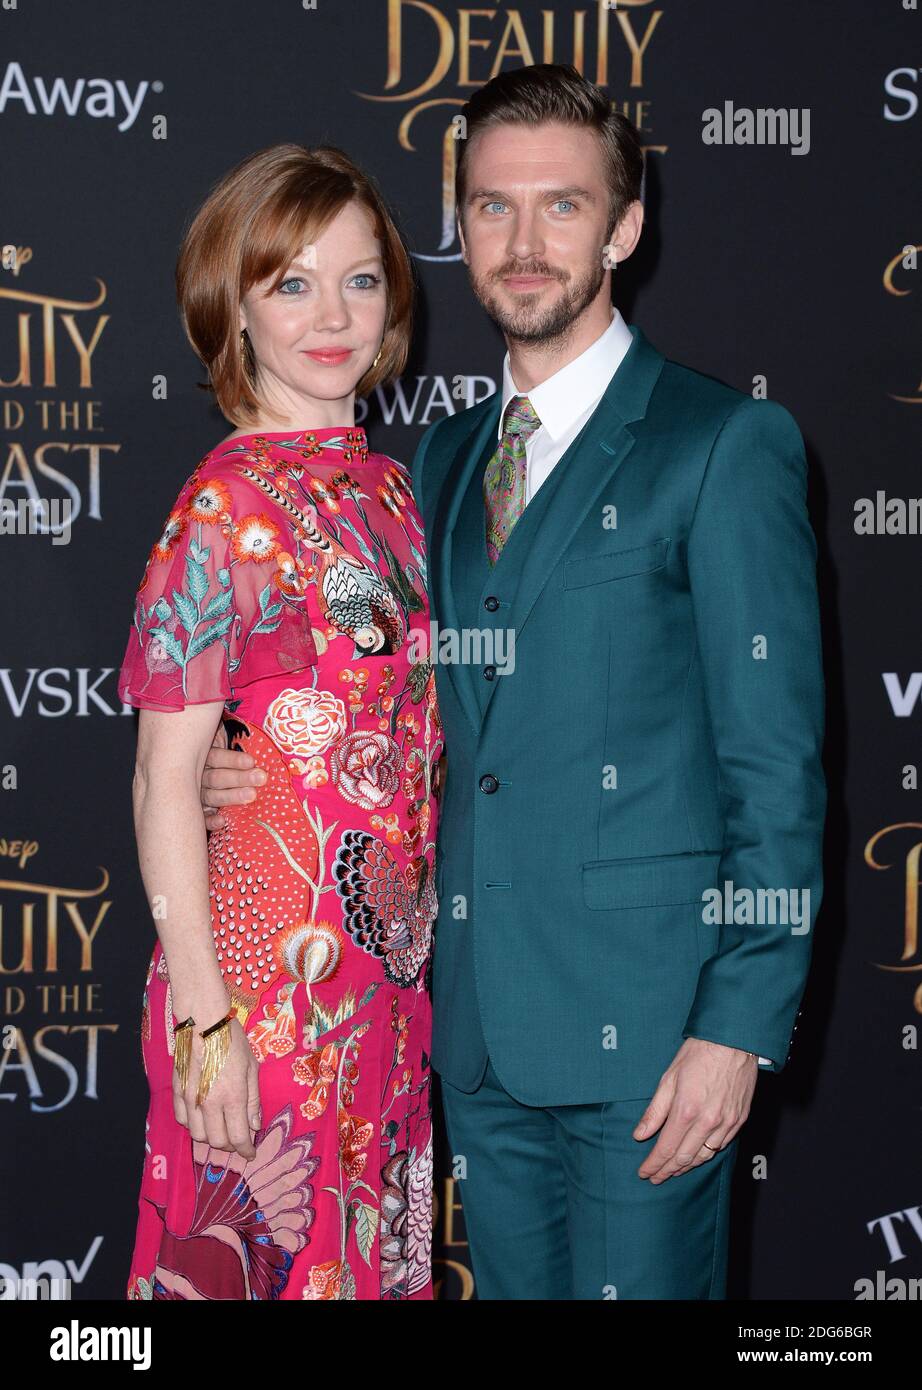 Dan Stevens, Susie Hariet attend the Premiere of Disney's 'Beauty And ...